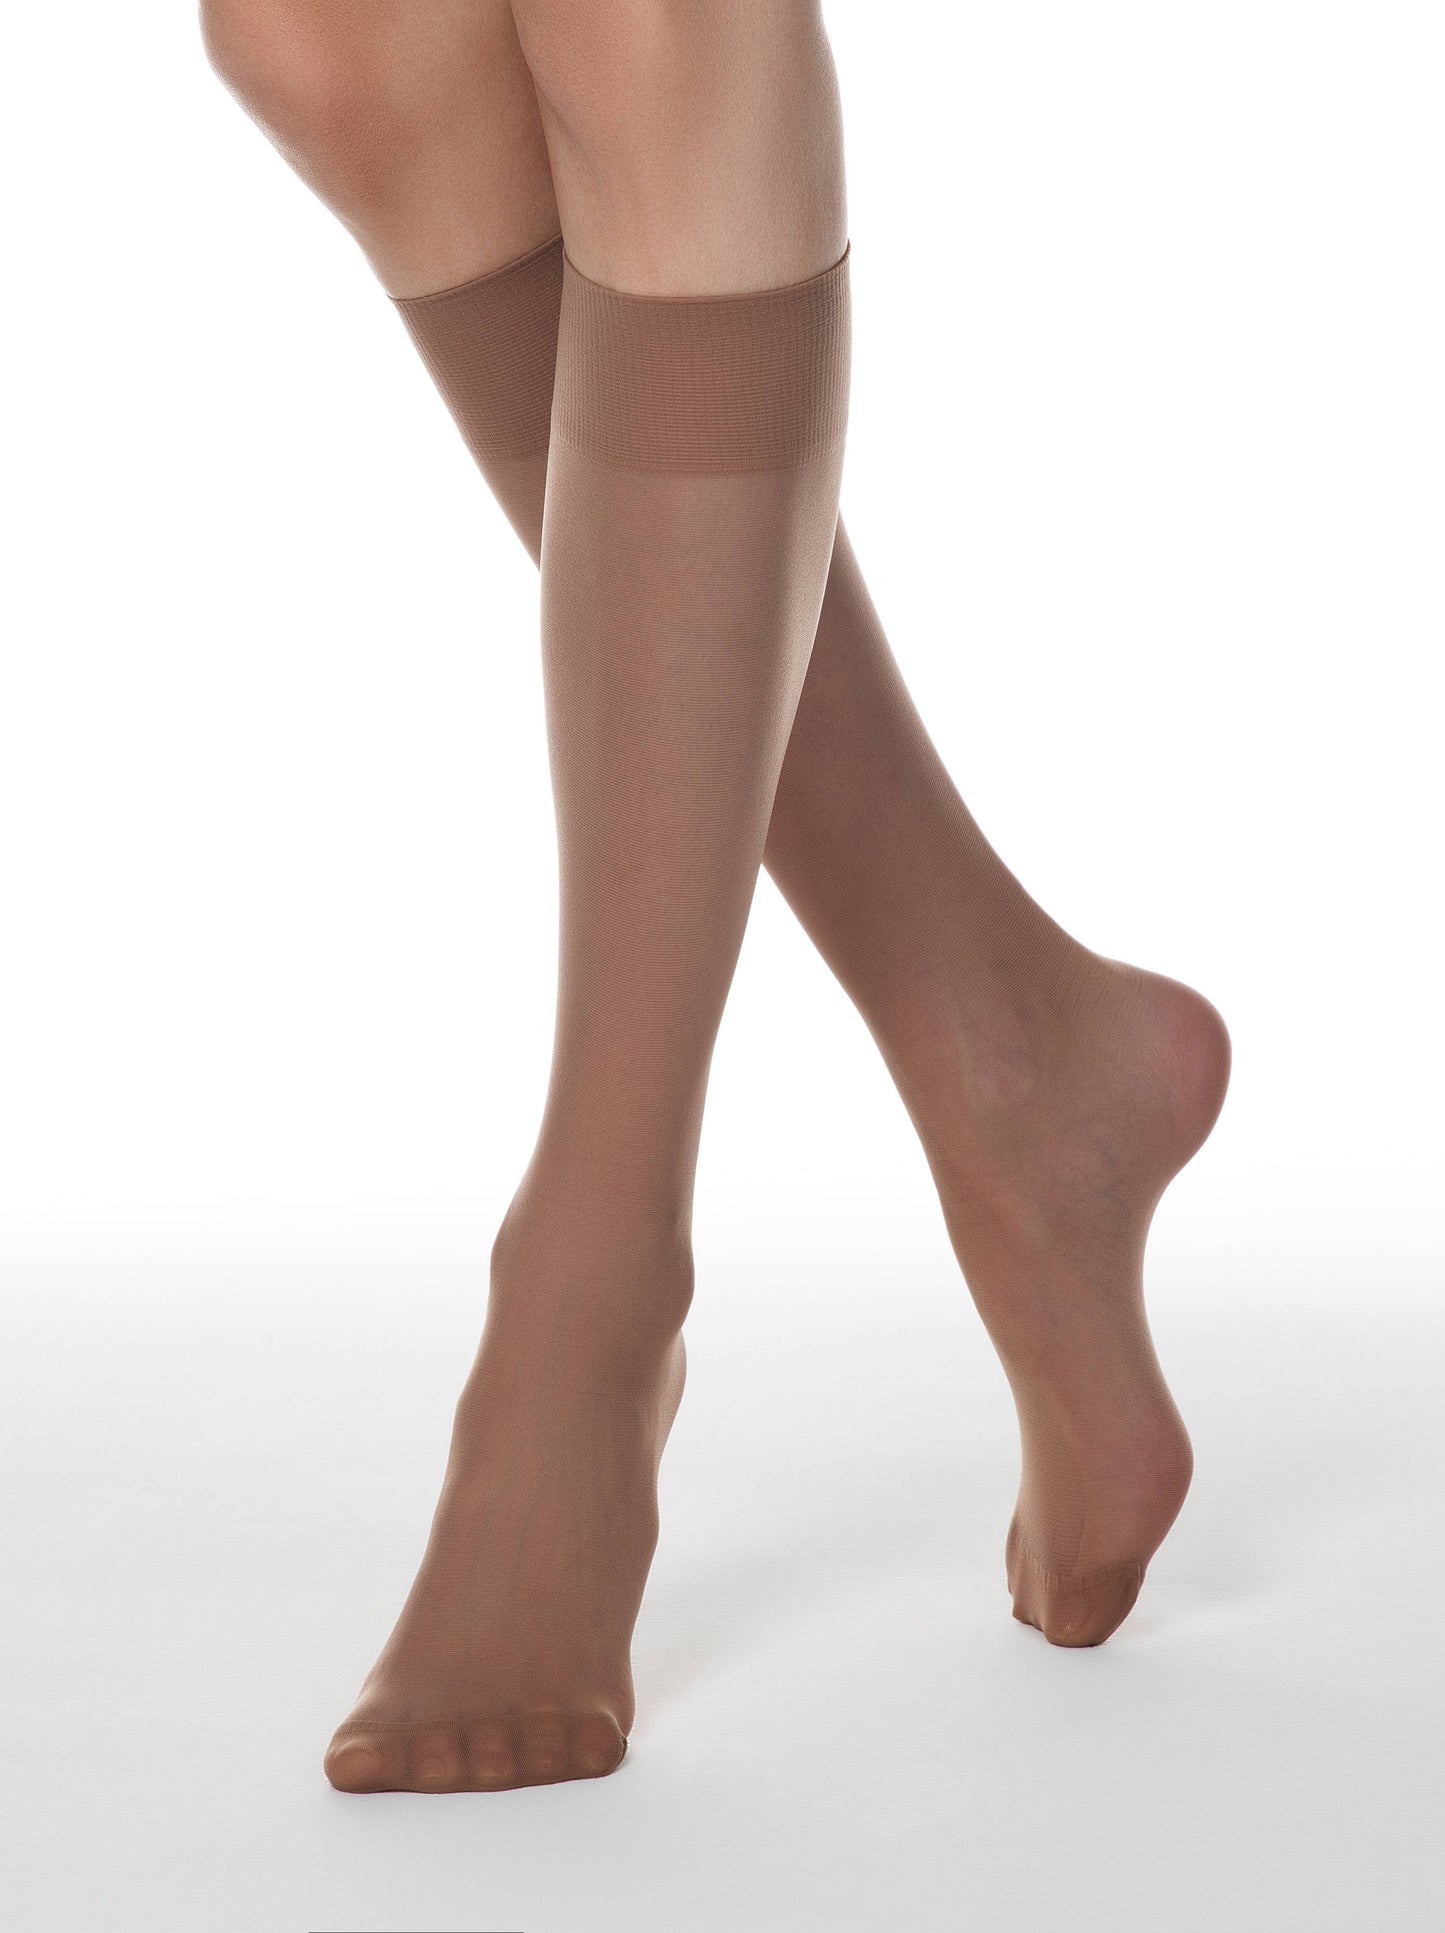 Conte/Esli Accent 20 Den - Thin Knee-Highs For Women - 2 Pairs (Pack) (8С-3СПЕ)